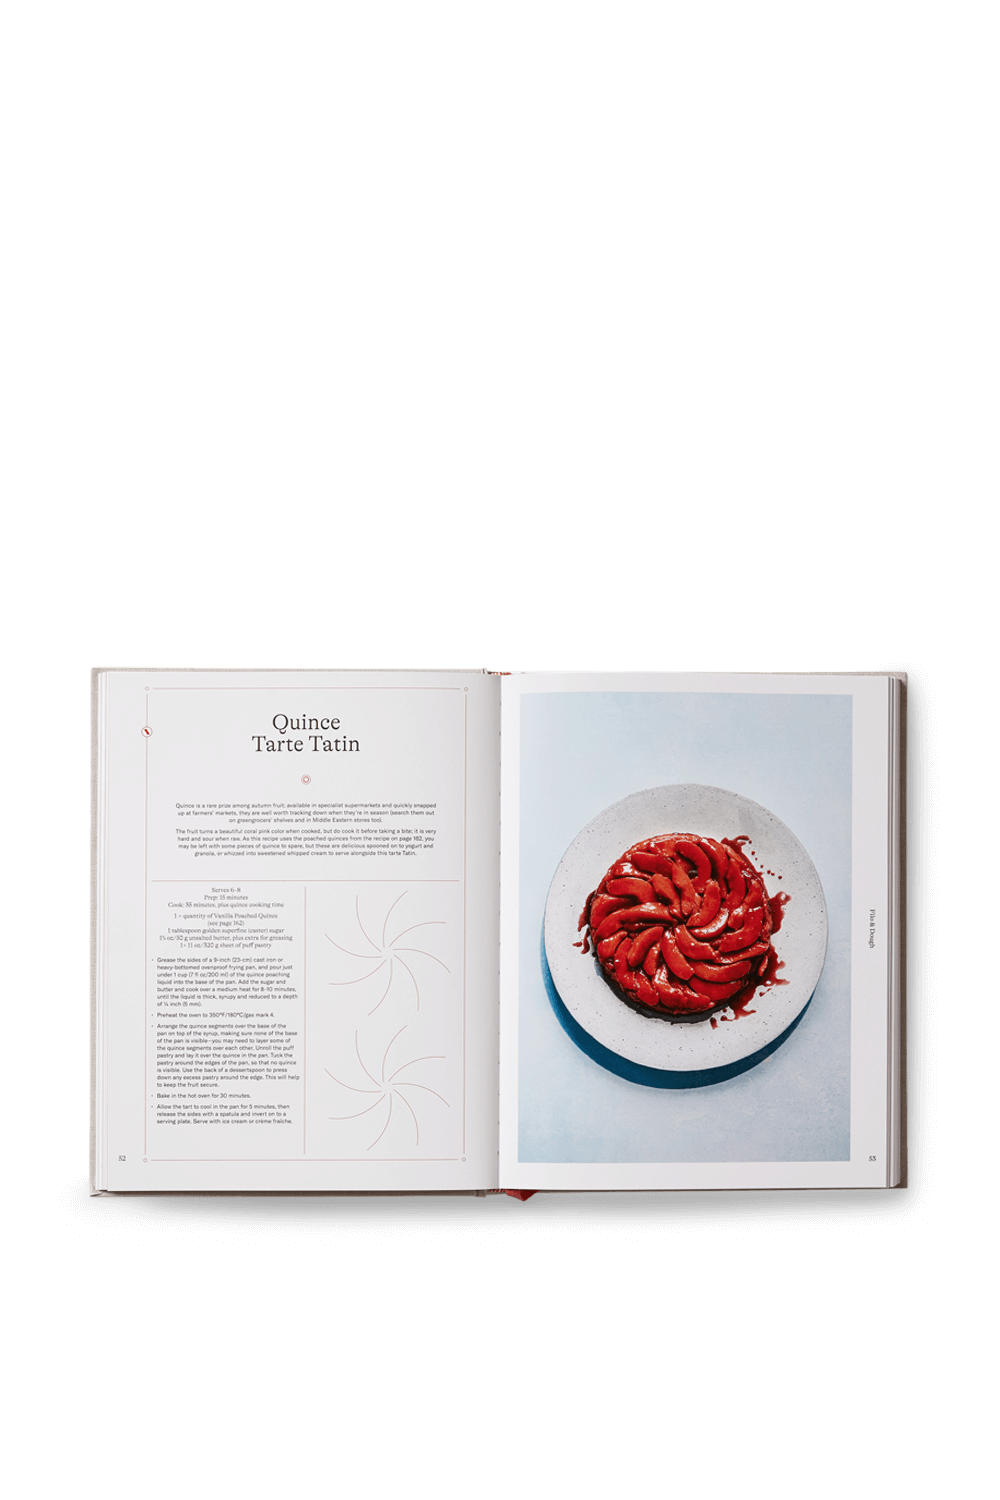 Middle Eastern Sweets Hage PHAIDON